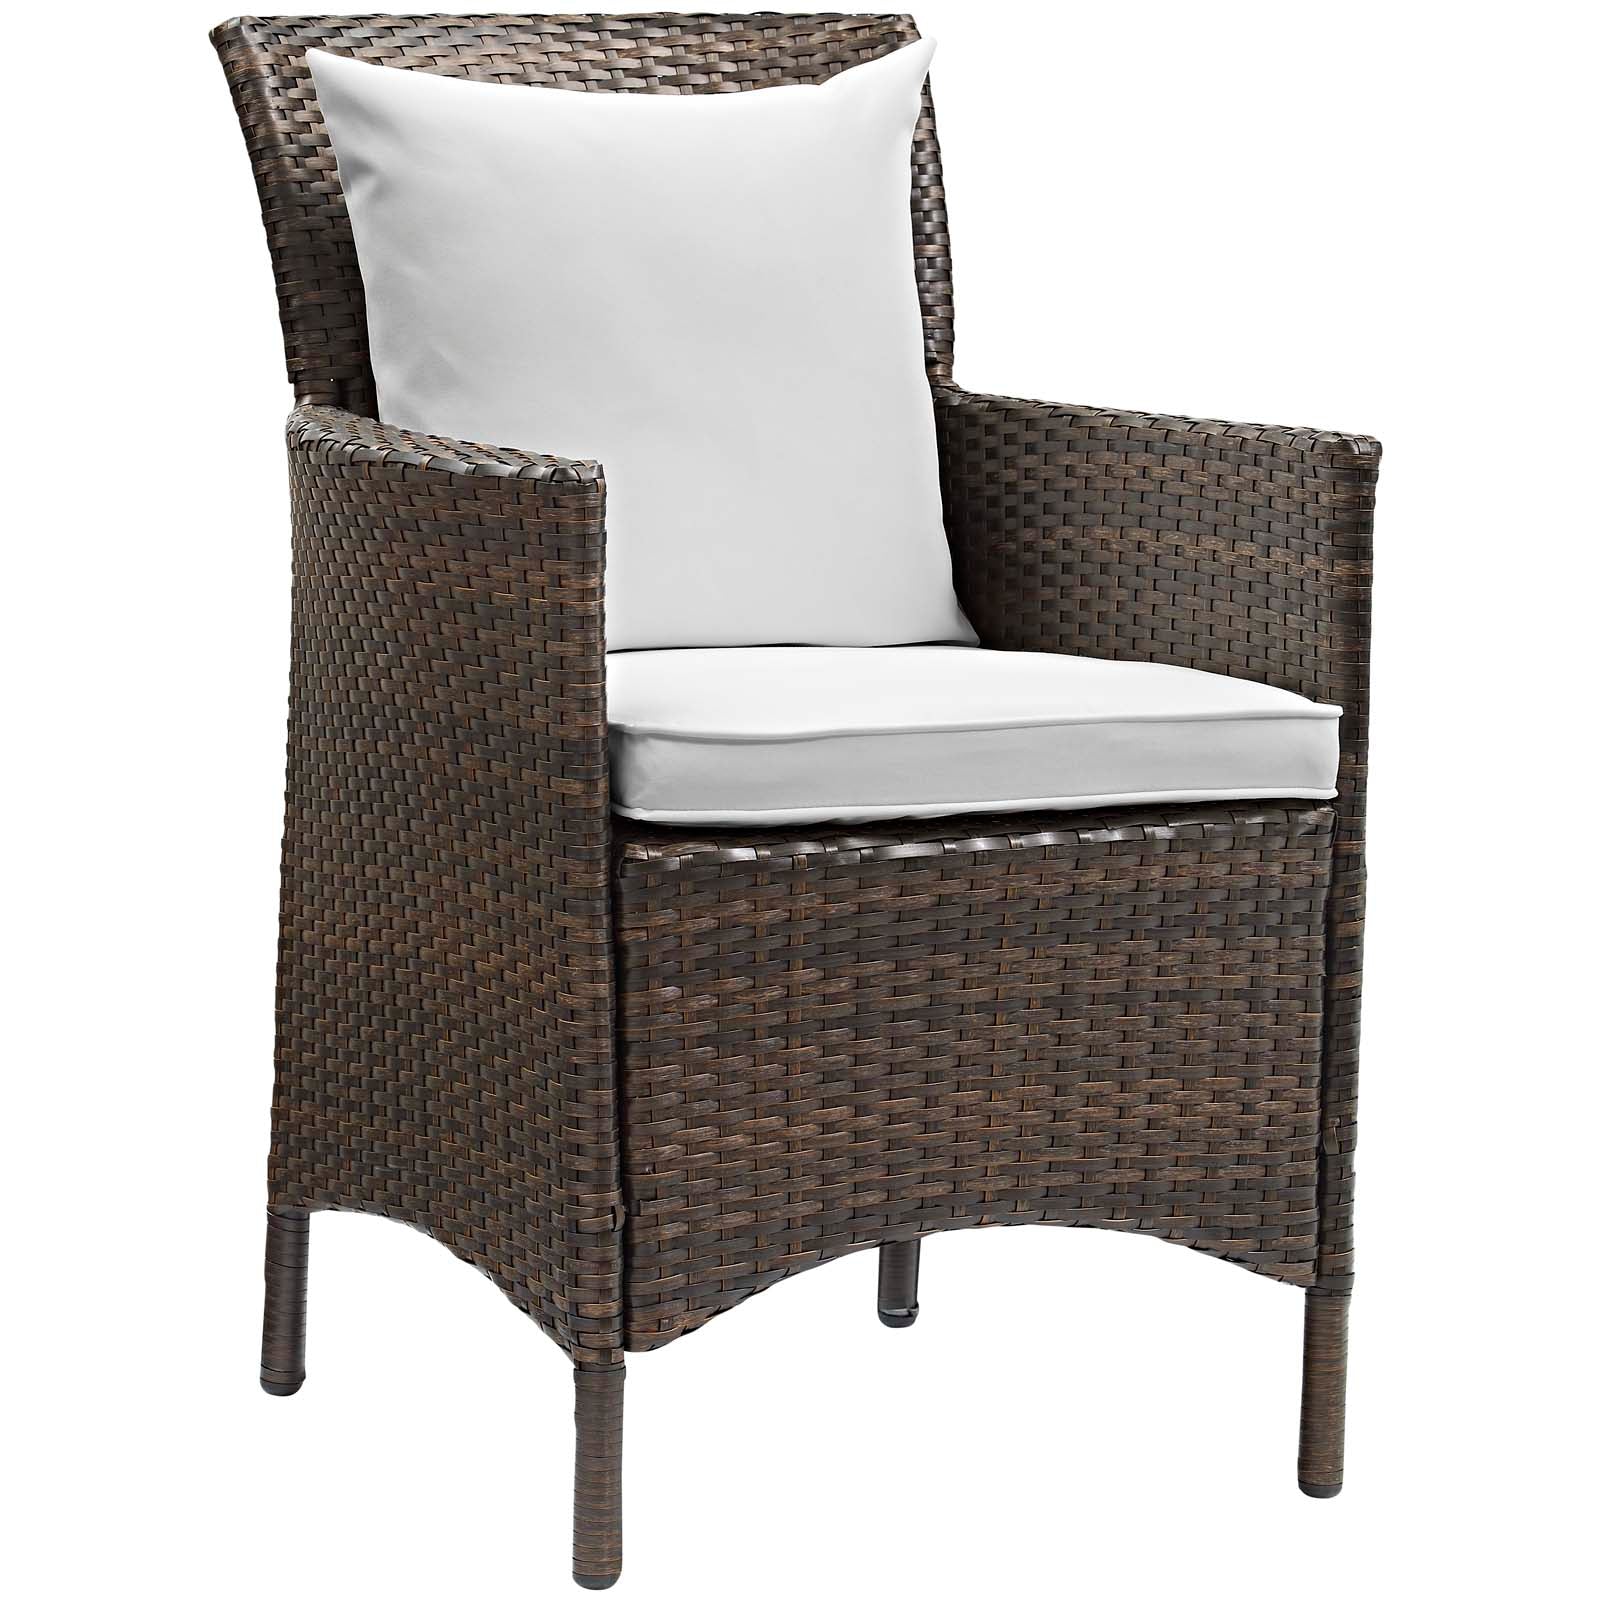 Modway Outdoor Dining Chairs - Conduit Outdoor Patio Wicker Rattan Dining Armchair Set of 4 Brown White